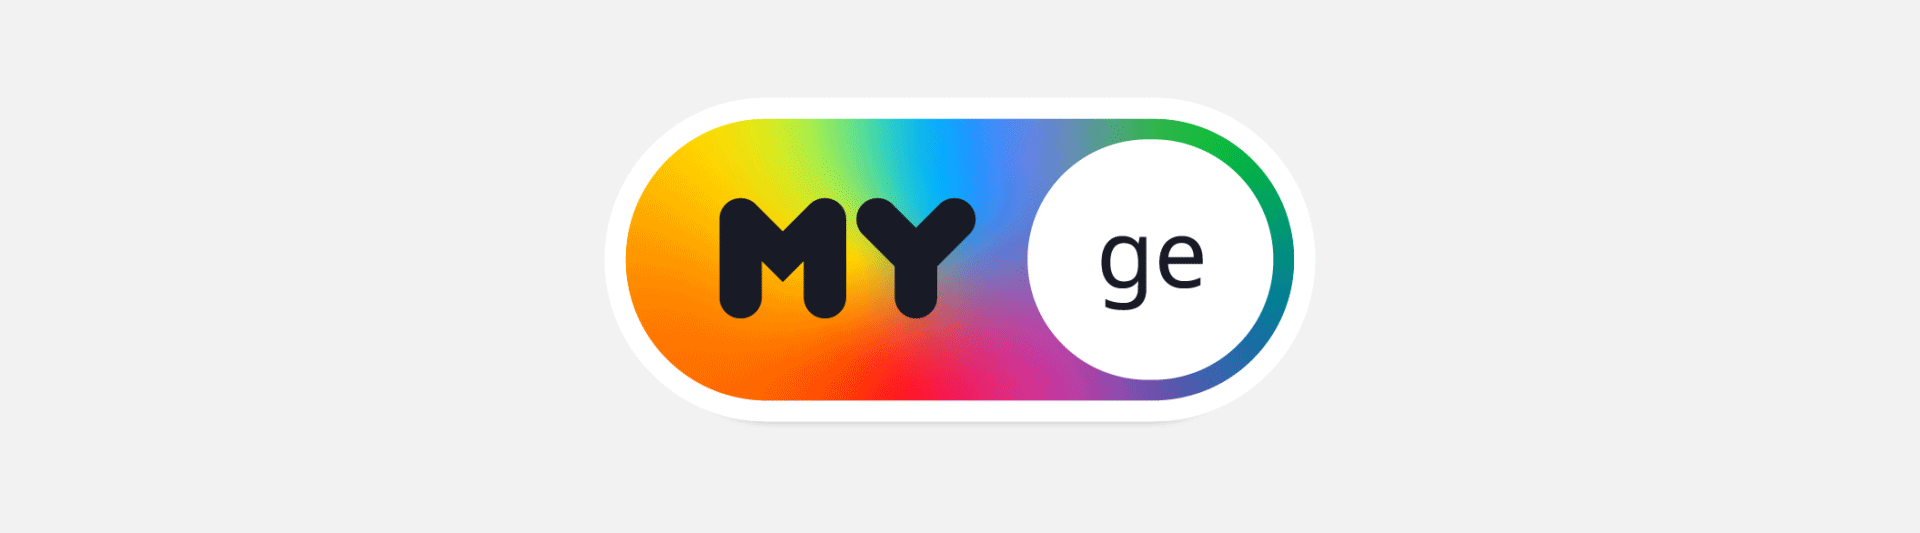 my.ge - Personalized Online Shopping